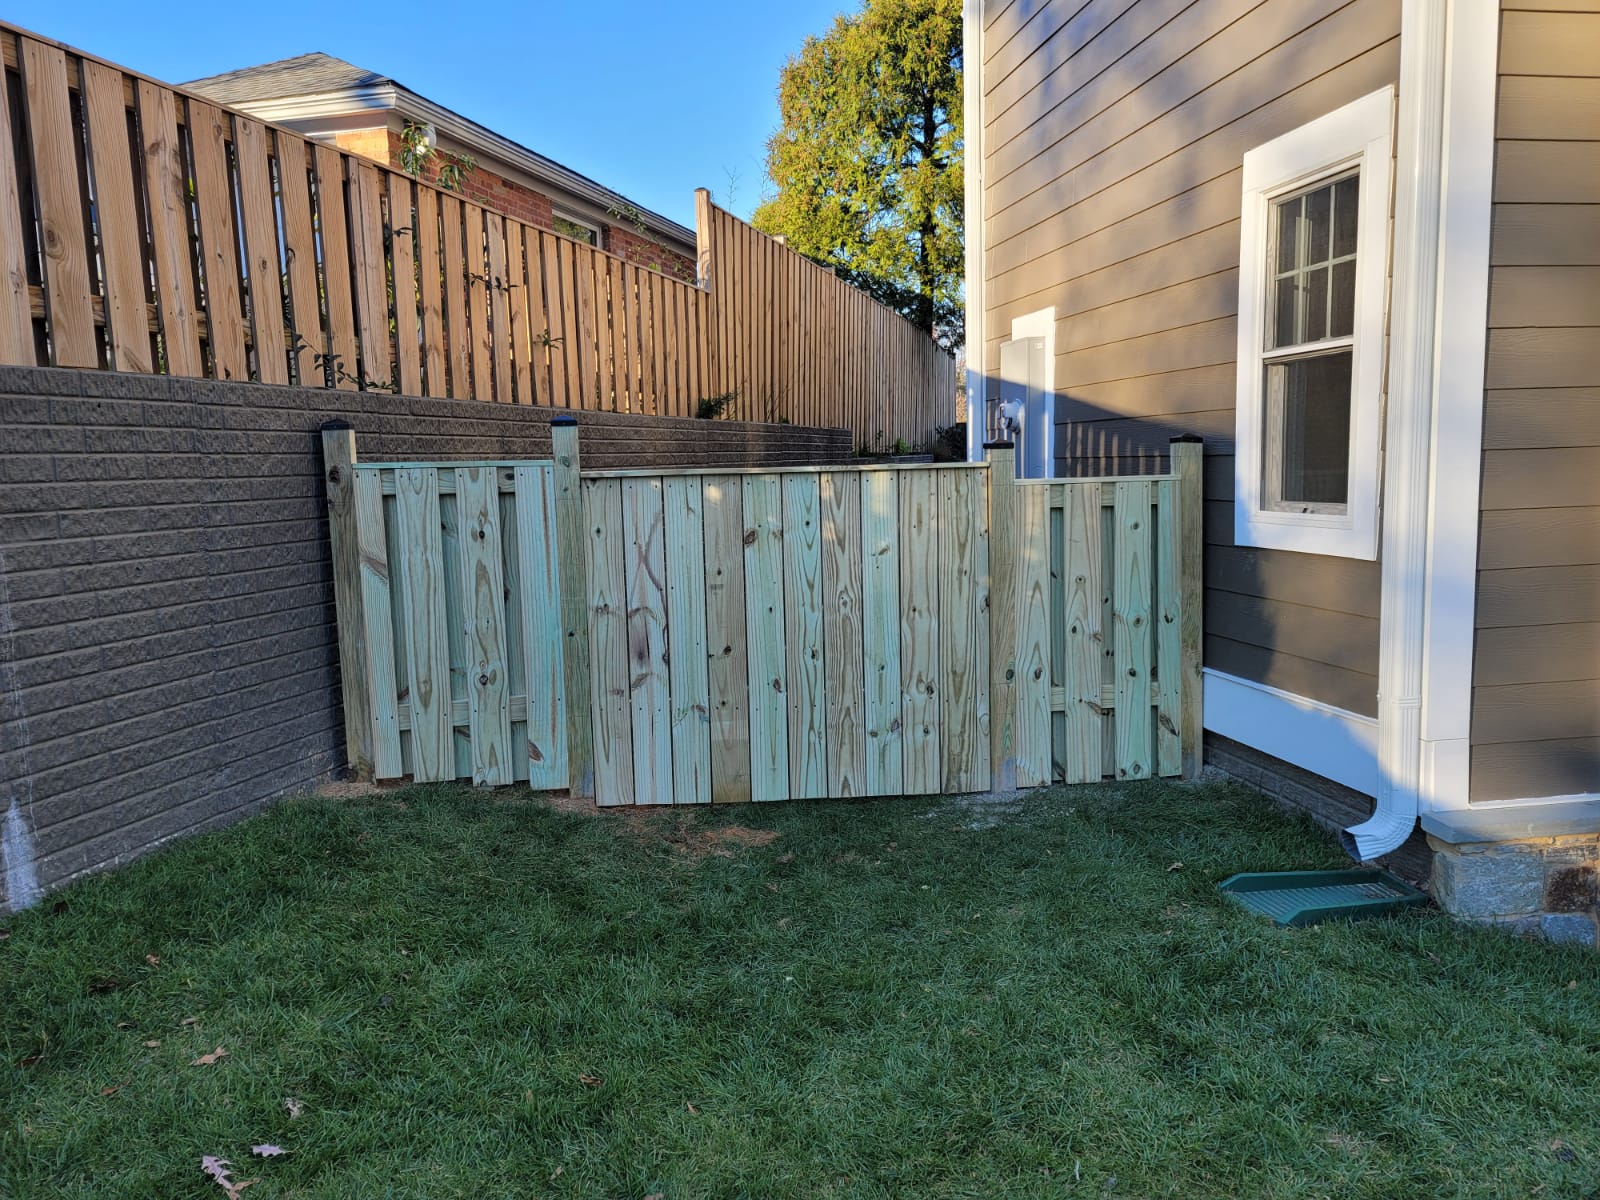 Professionals for Your Fence Maintenance and Repair Is Important